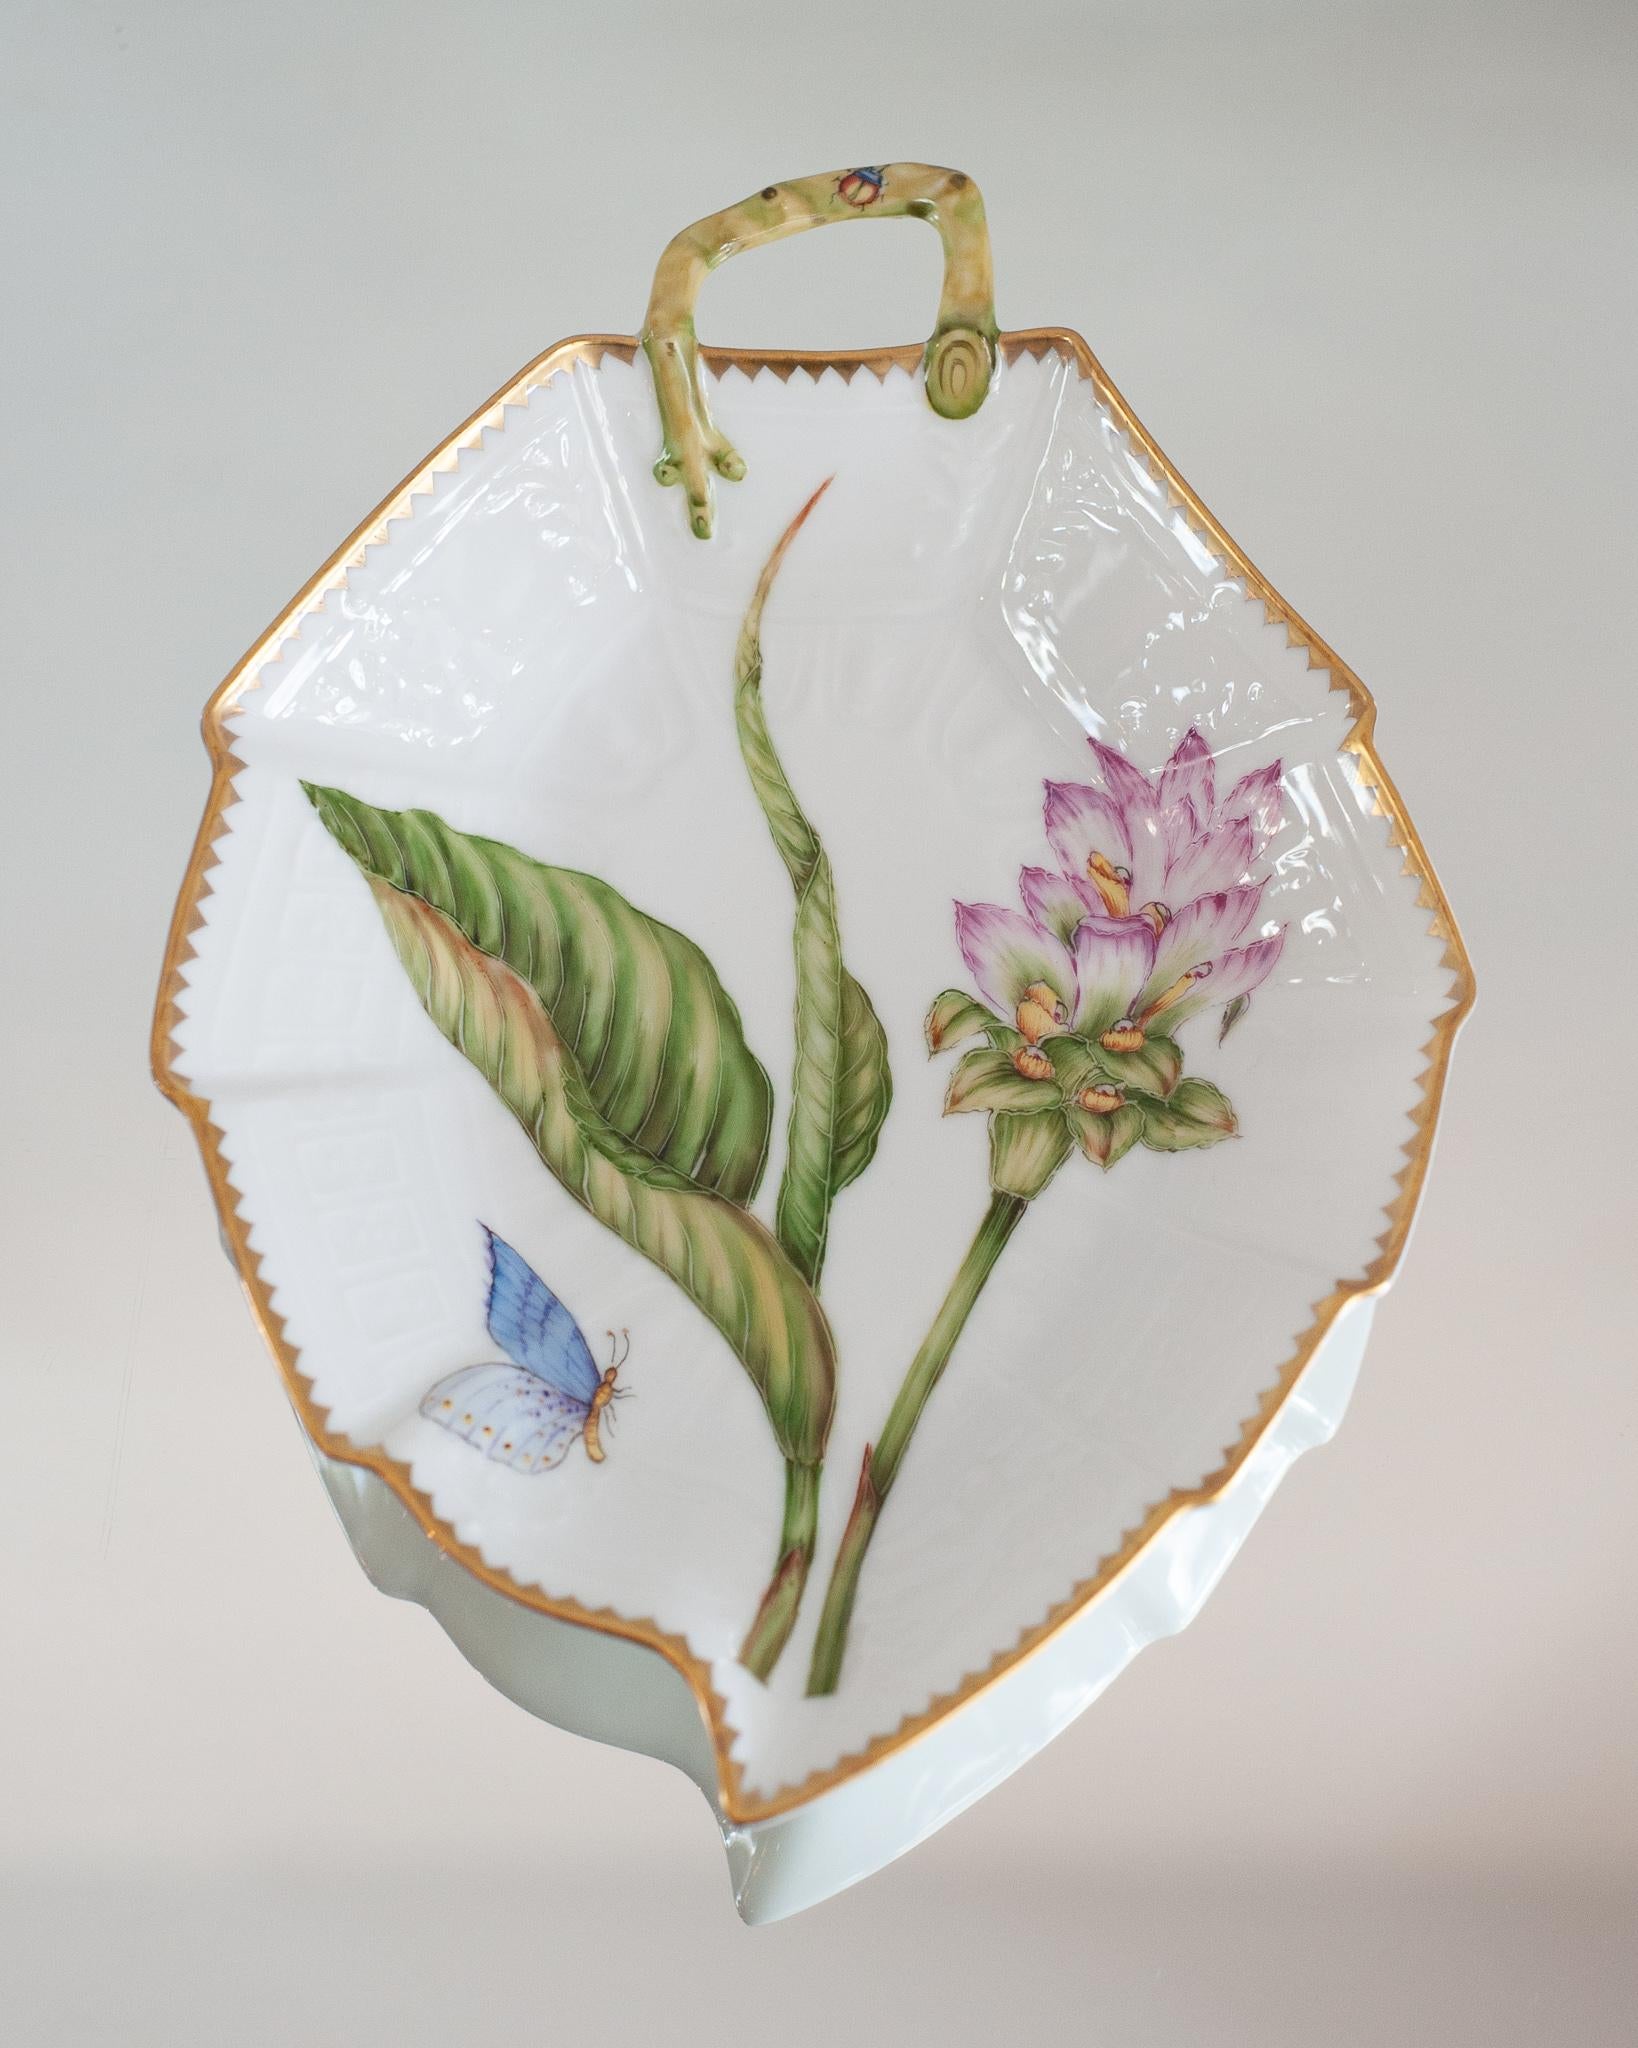 A beautiful hand painted leaf-shaped serving tray with handle, by Anna Weatherley Designs. Anna Weatherley has been designing and producing Fine Botanical Hand Painted Porcelain in Hungary for 30 years.